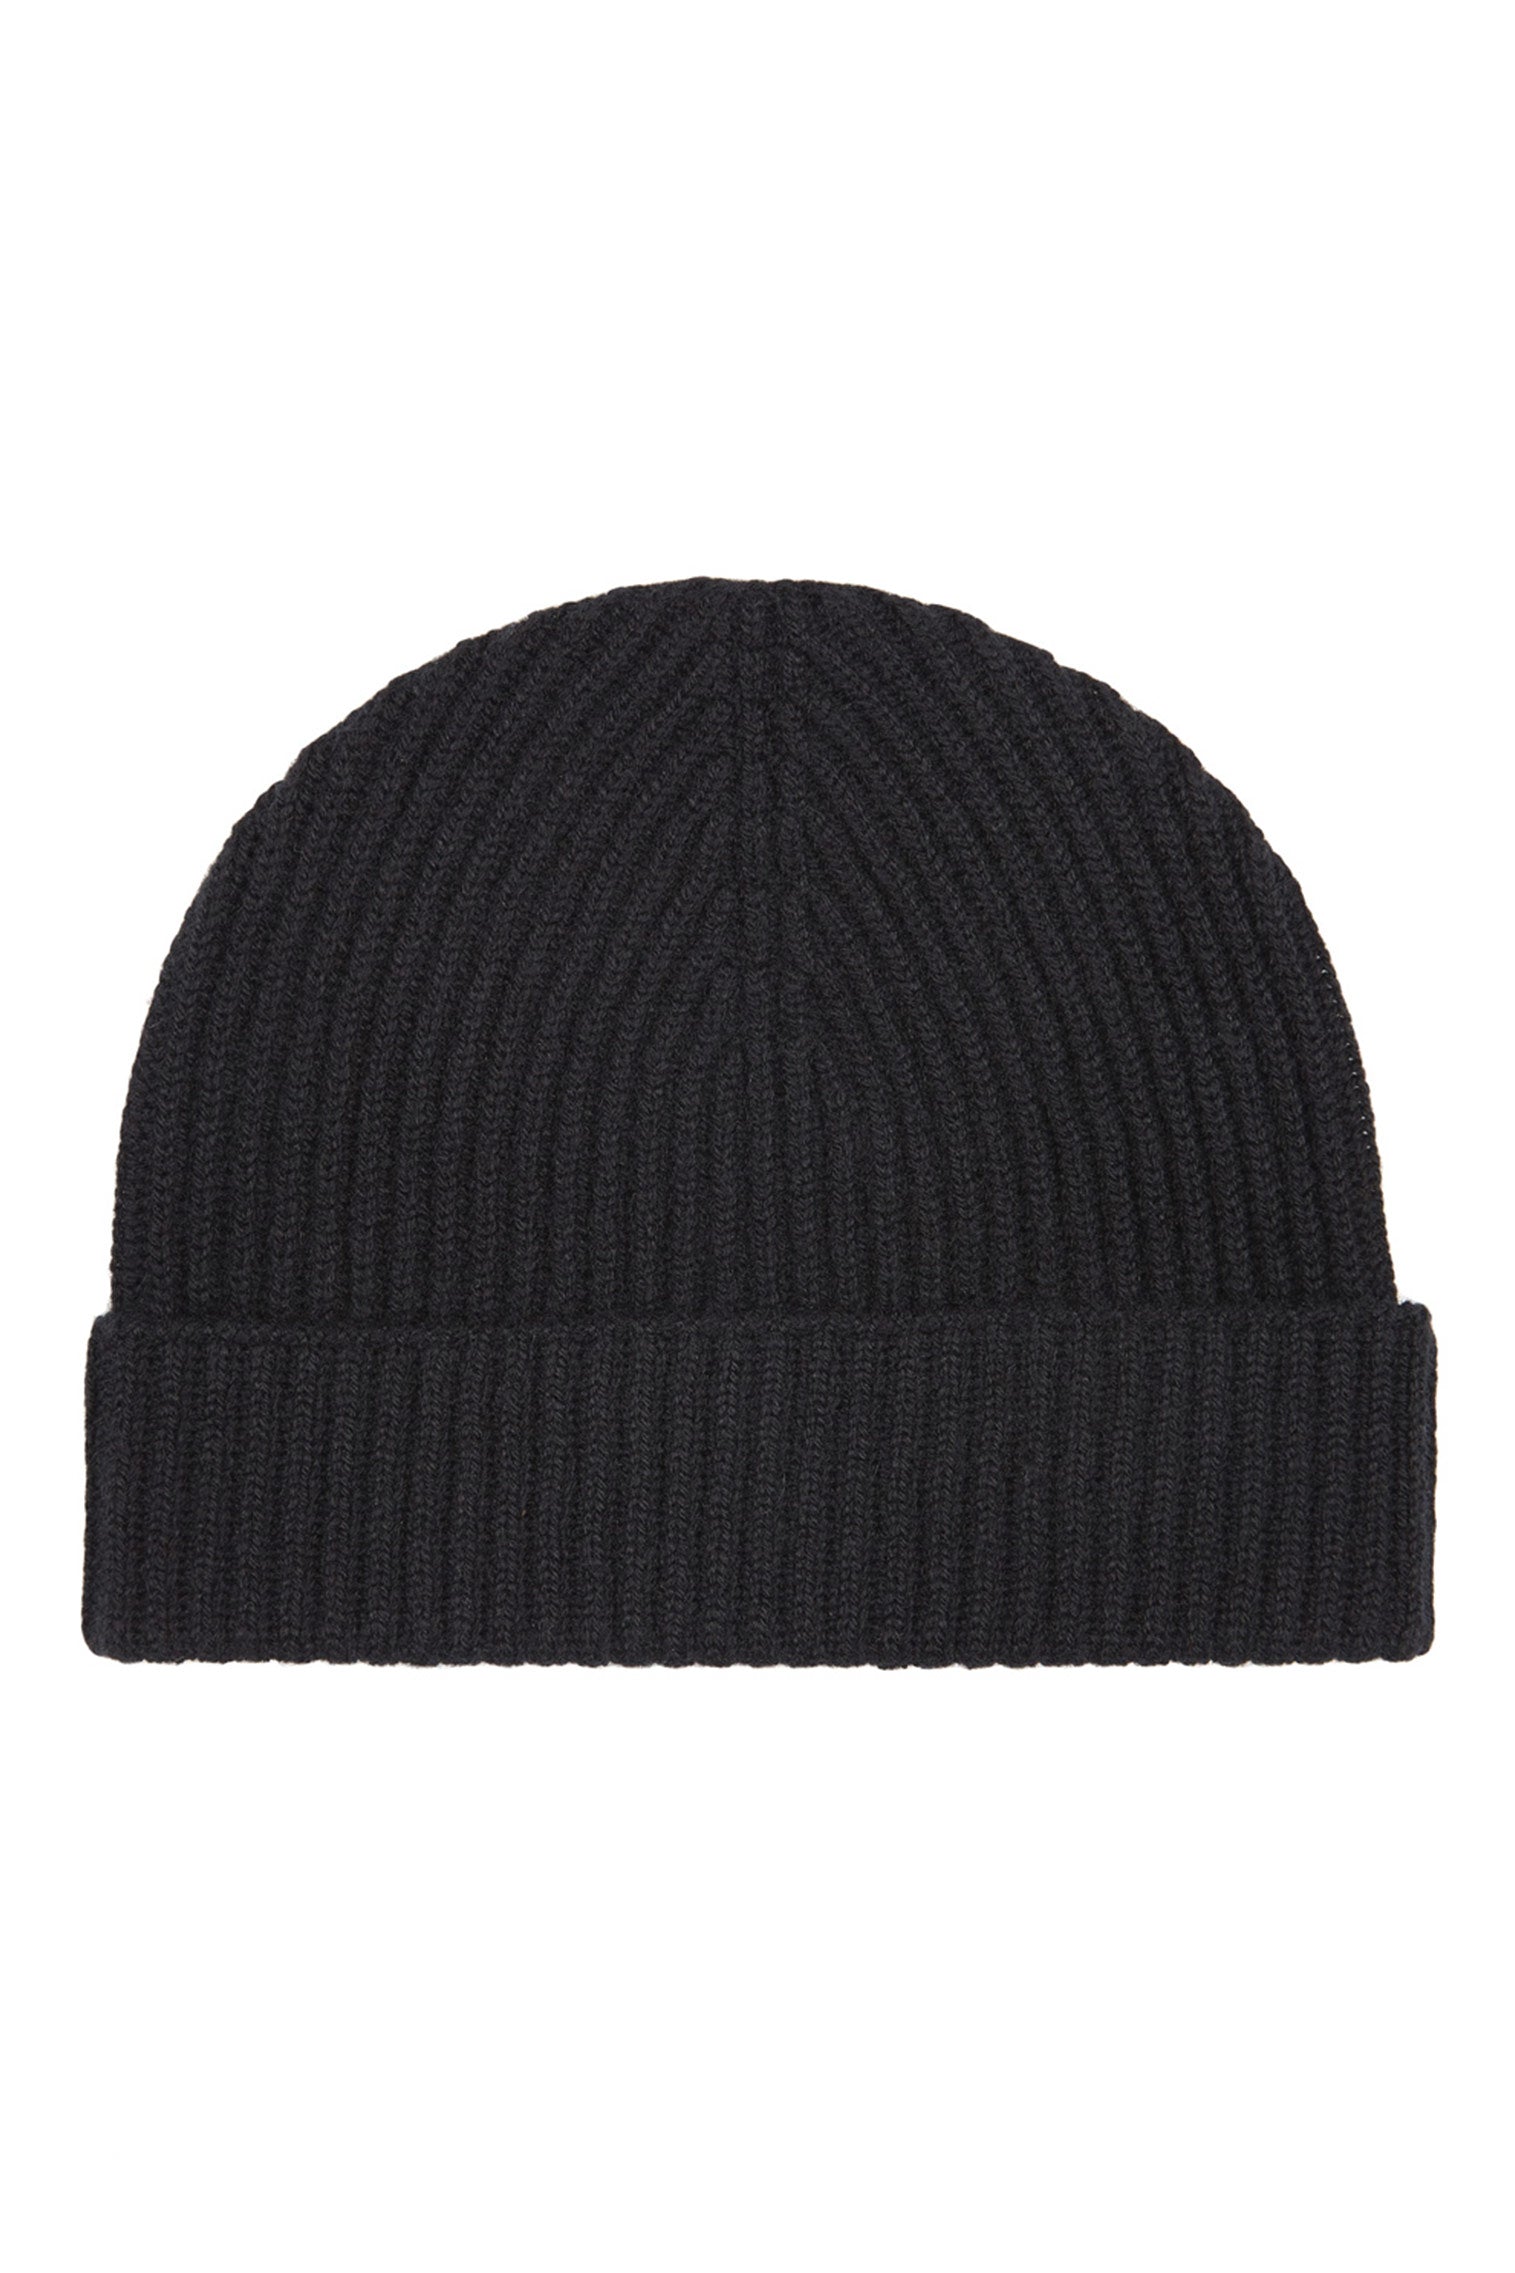 Black Cashmere Ski Beanie - Mother's Day Gift Guide - Lock & Co. Hatters London UK